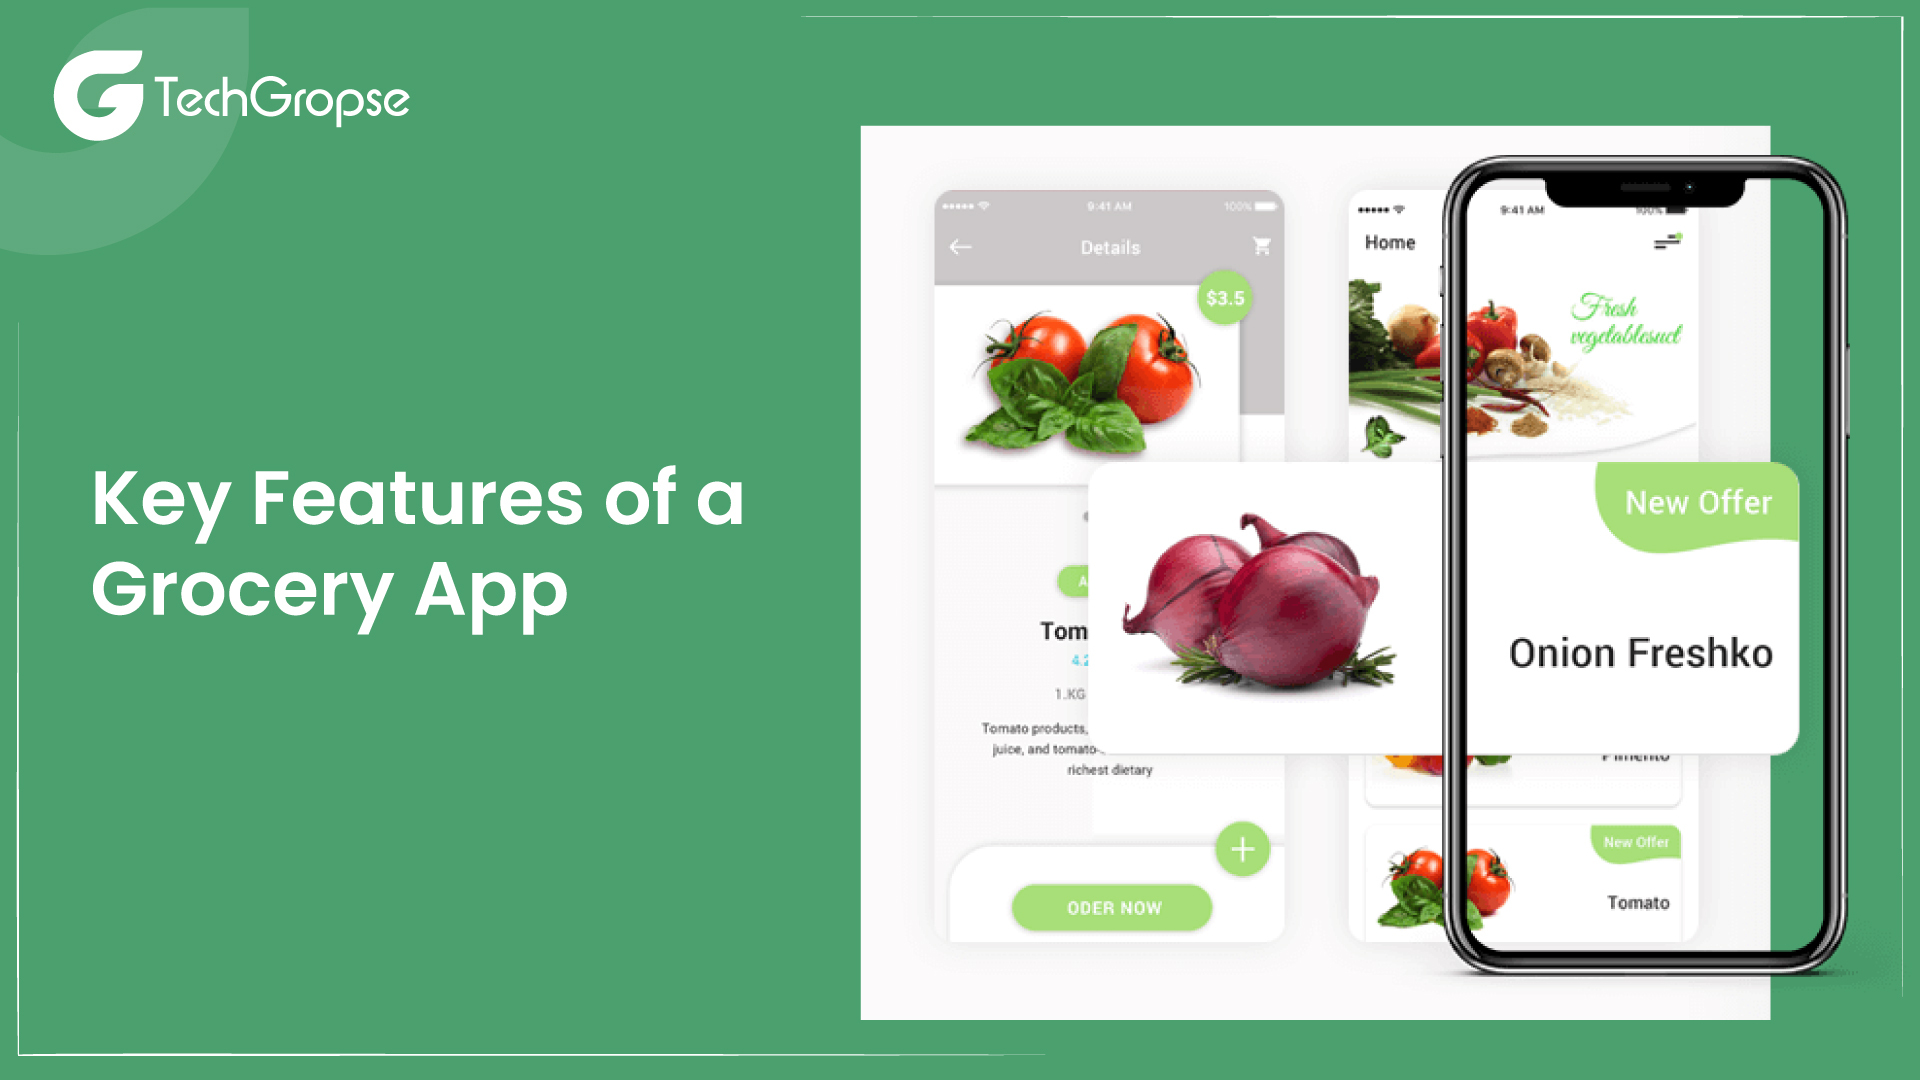 Key Features of a Grocery App